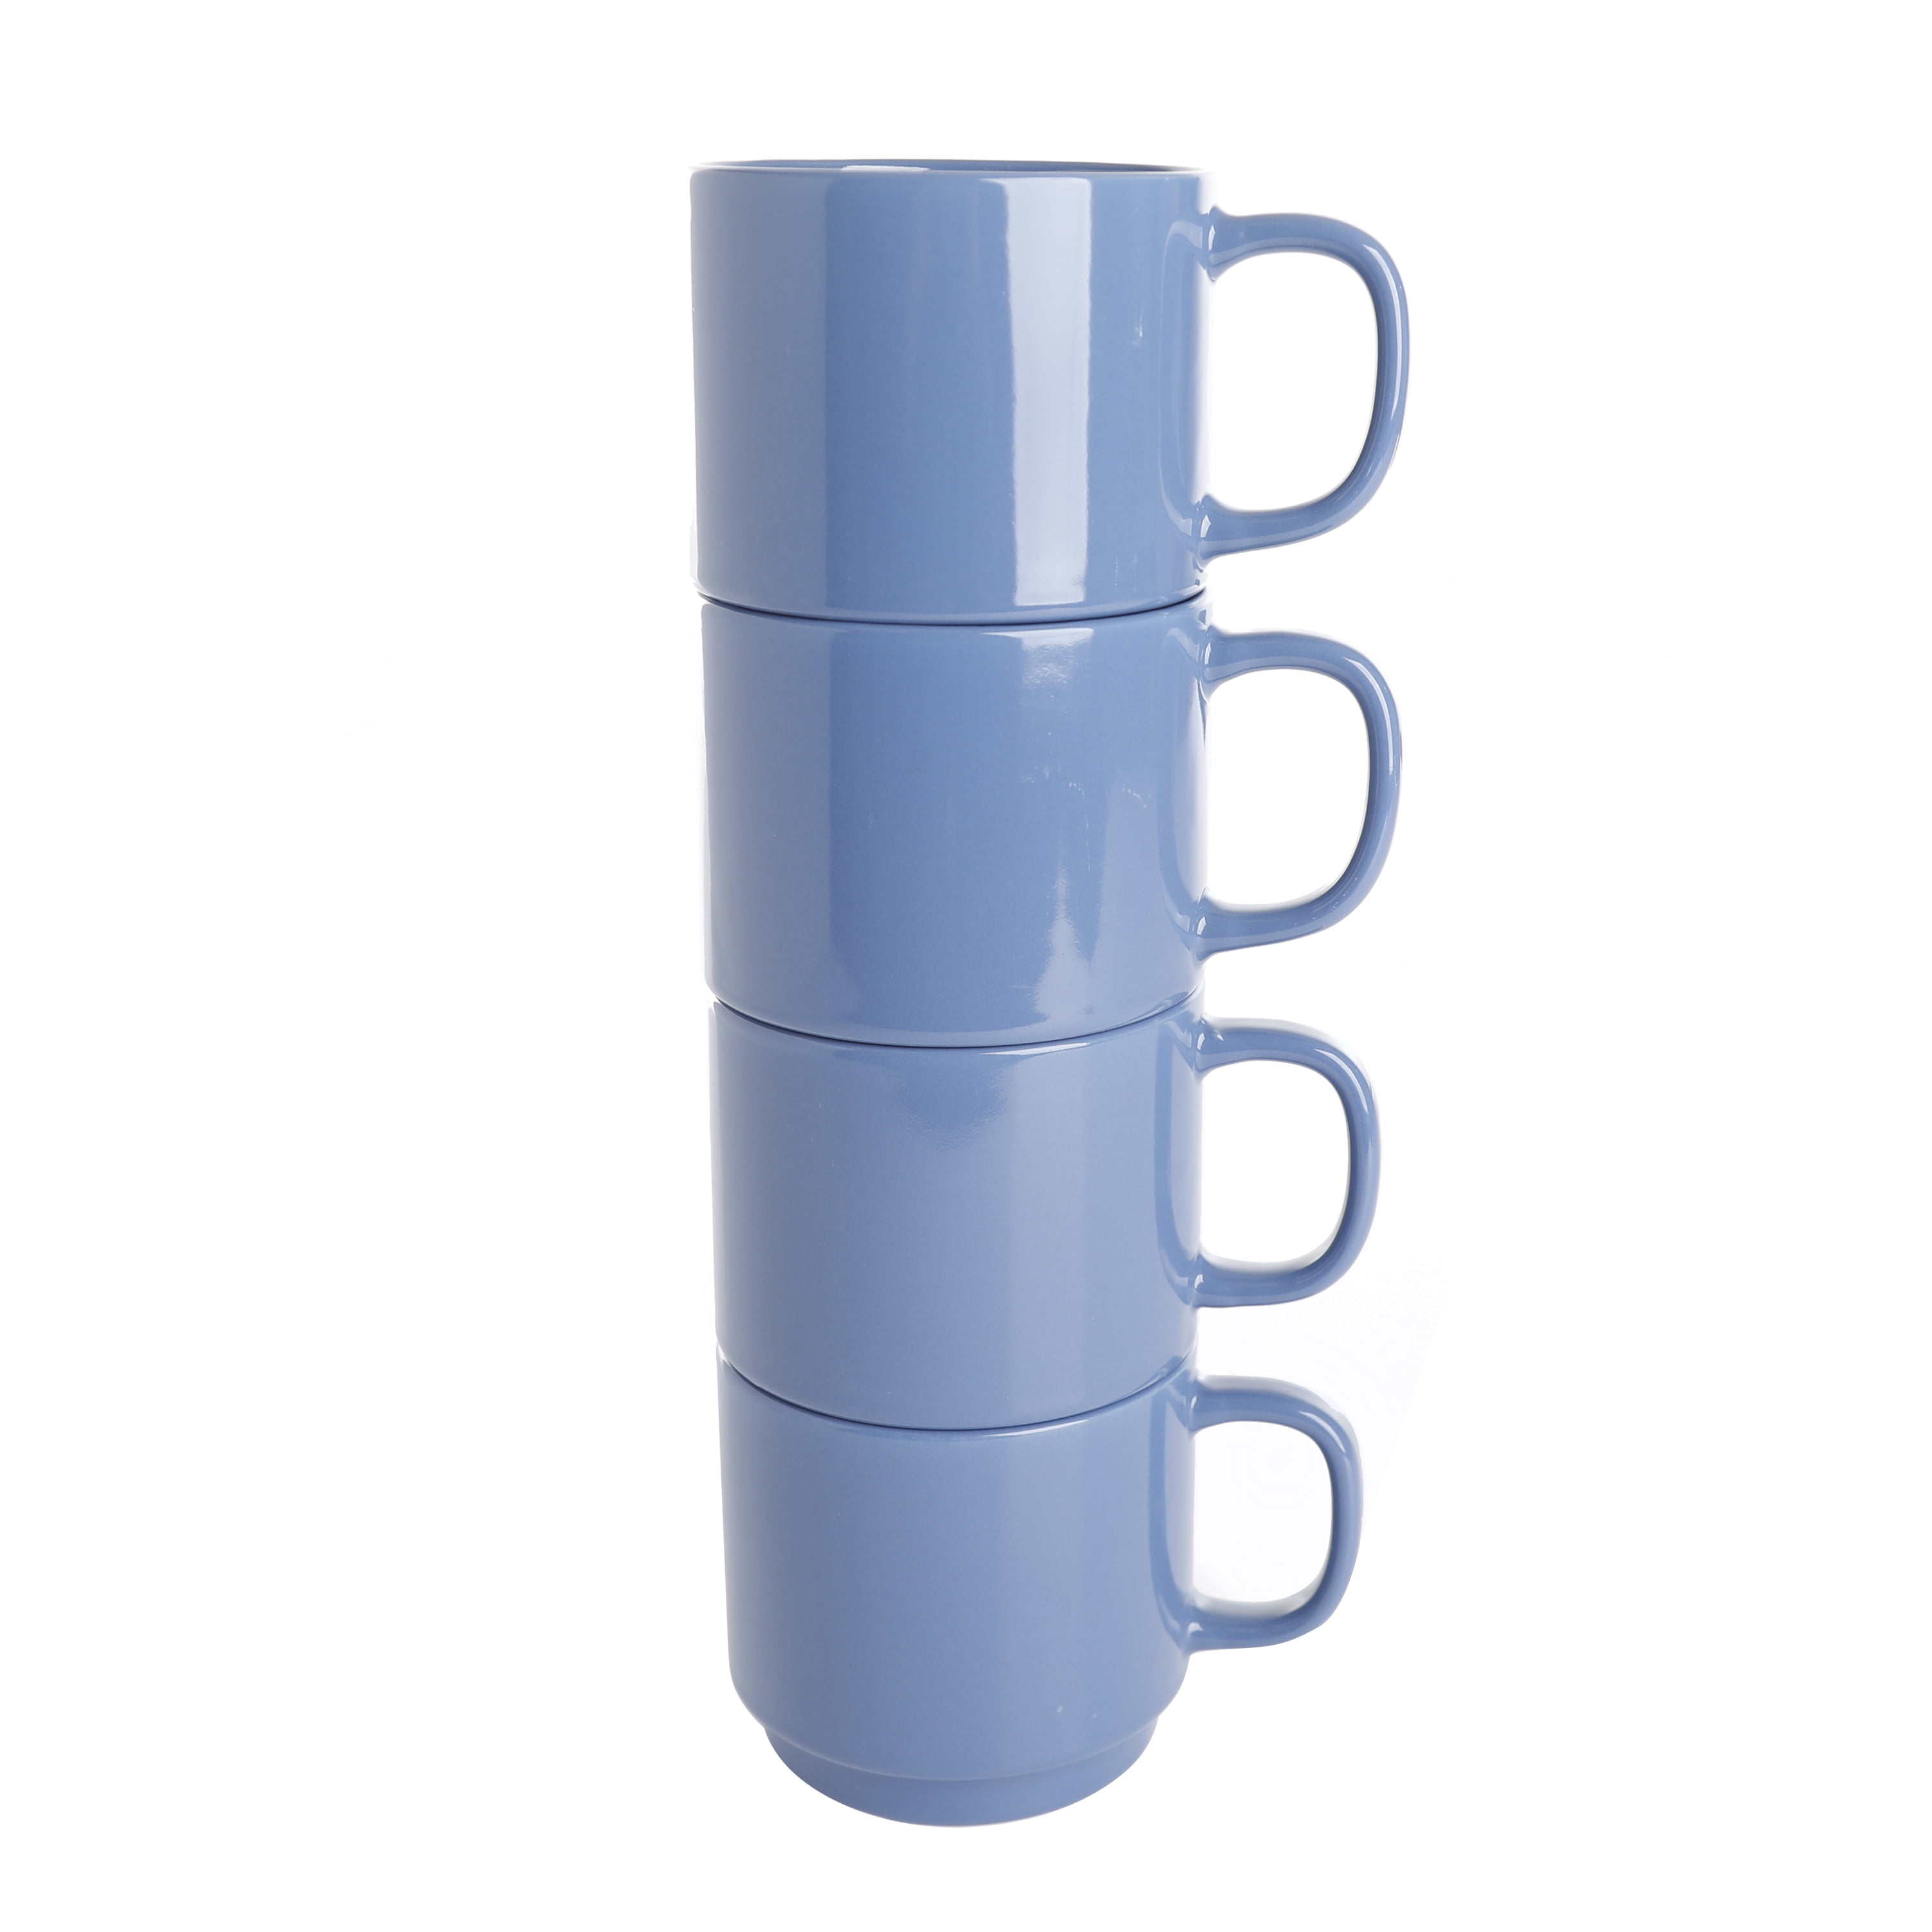 🔹Yeti 8oz Stackable Cup🔹 Just enough coffee for just about anywhere. Fits  in most cupholders. Available at Blue Sky Forbes.